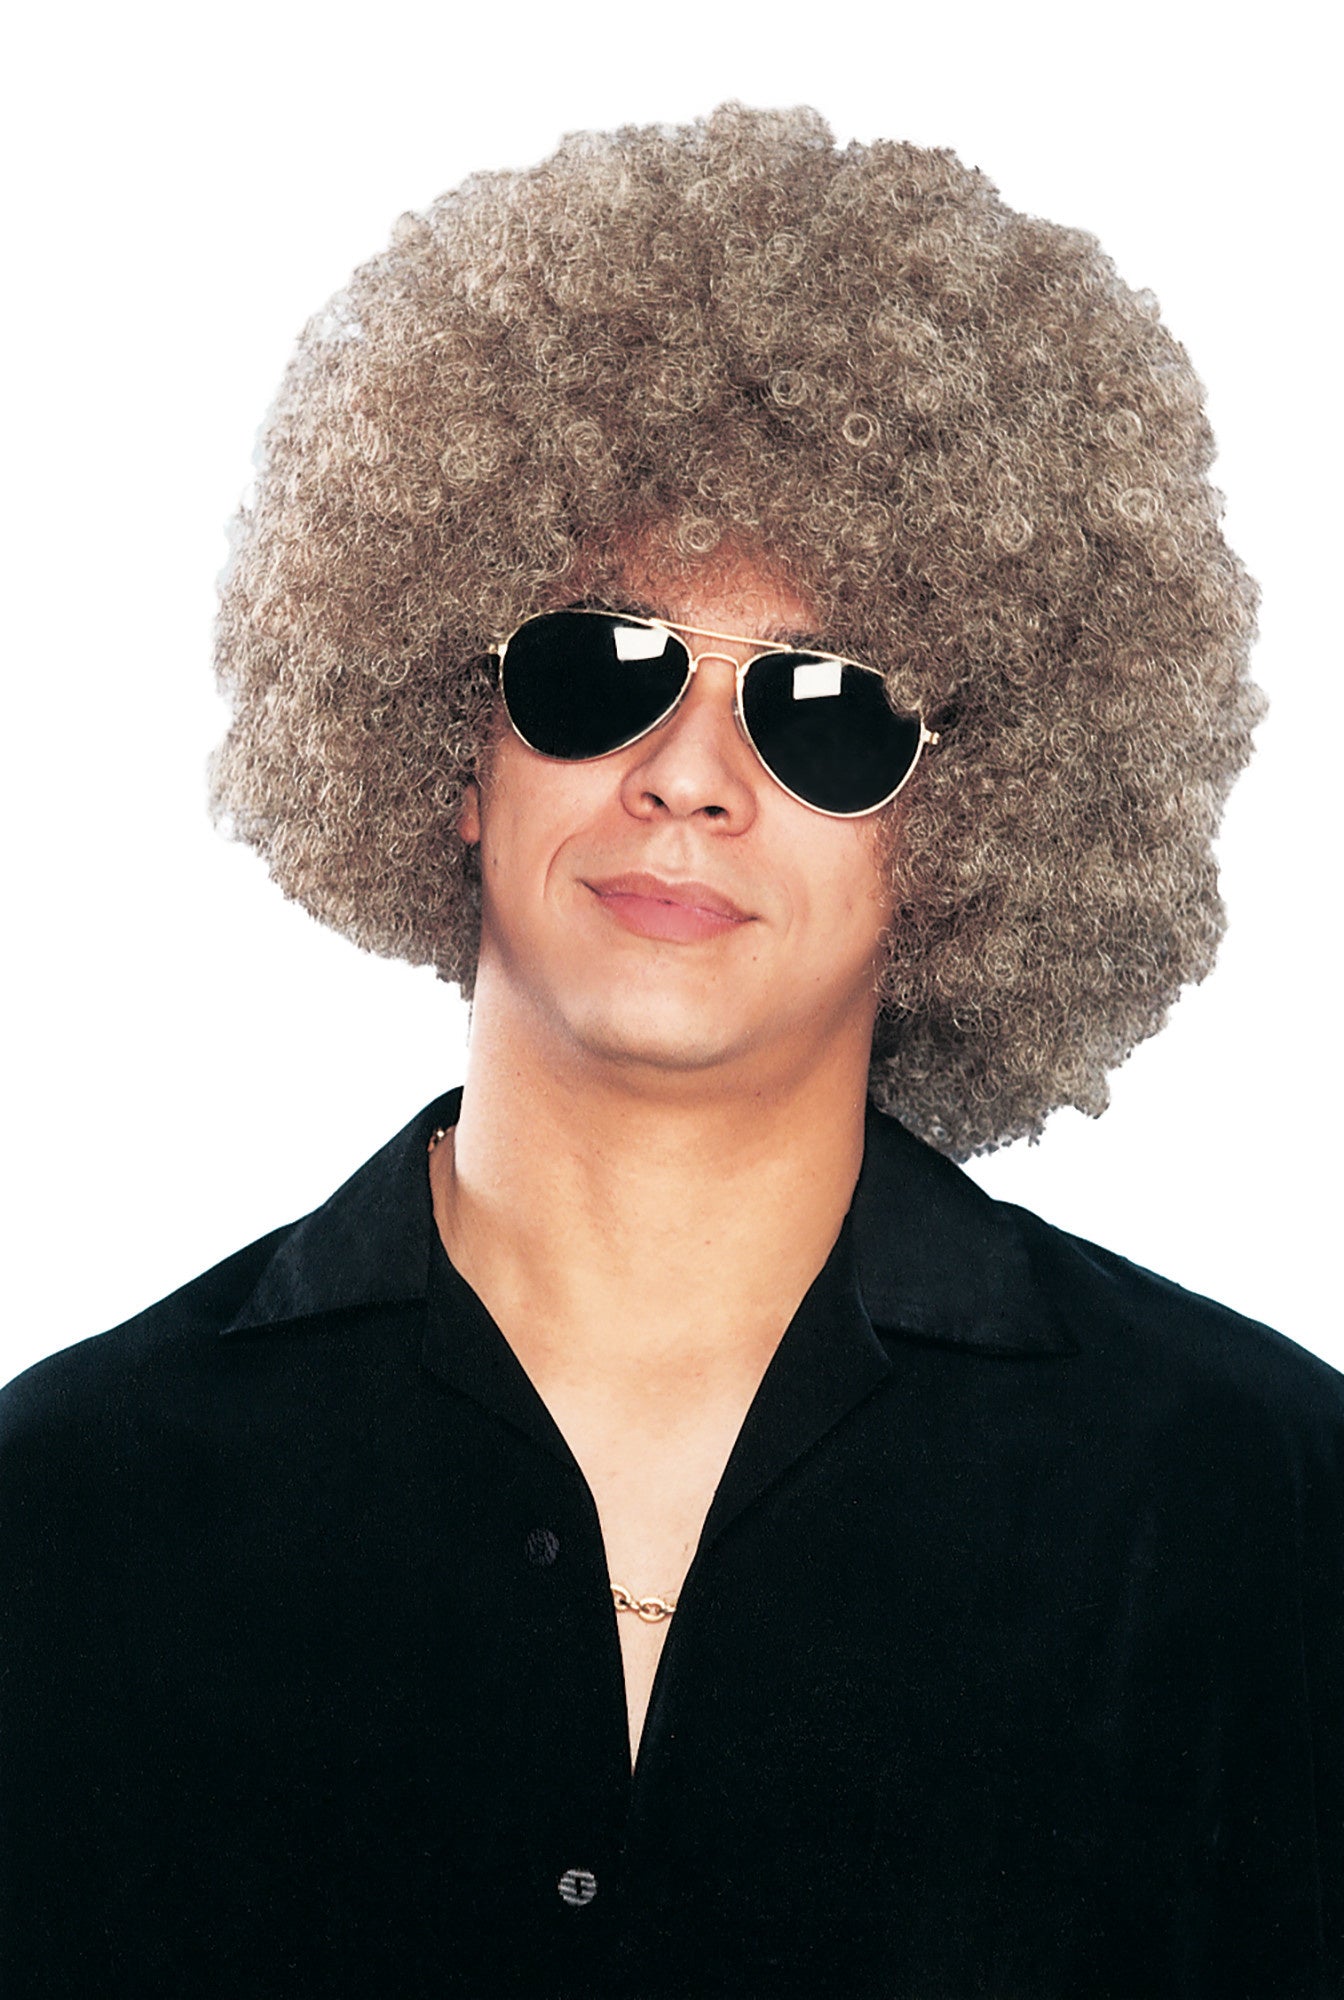 Deluxe Disco Afro Wig - Mix Blonde